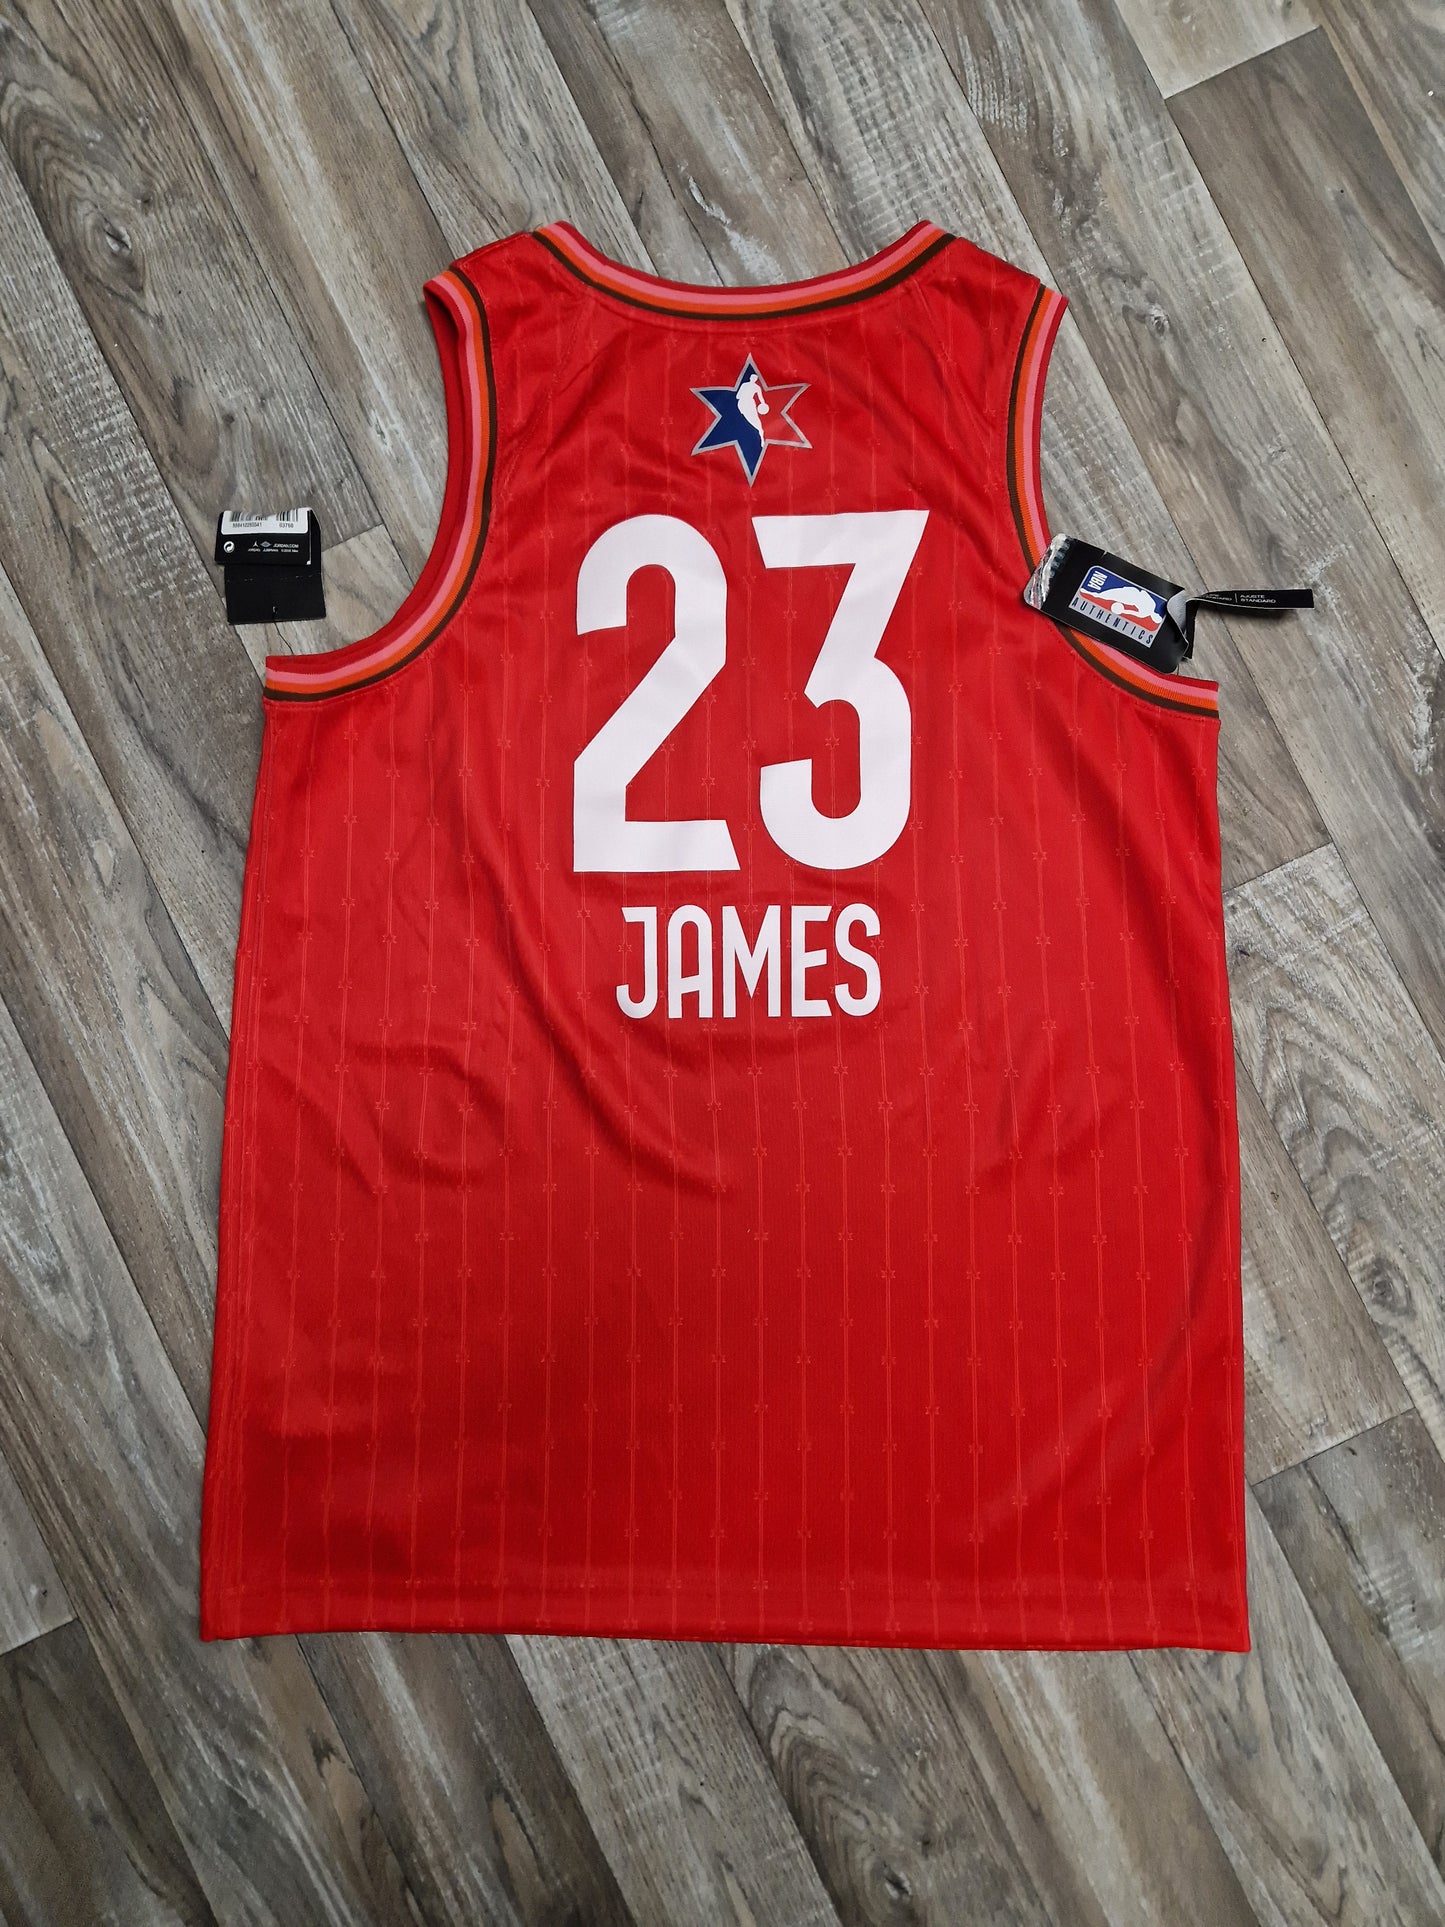 Lebron James NBA All Star 2021 Jersey Size Large